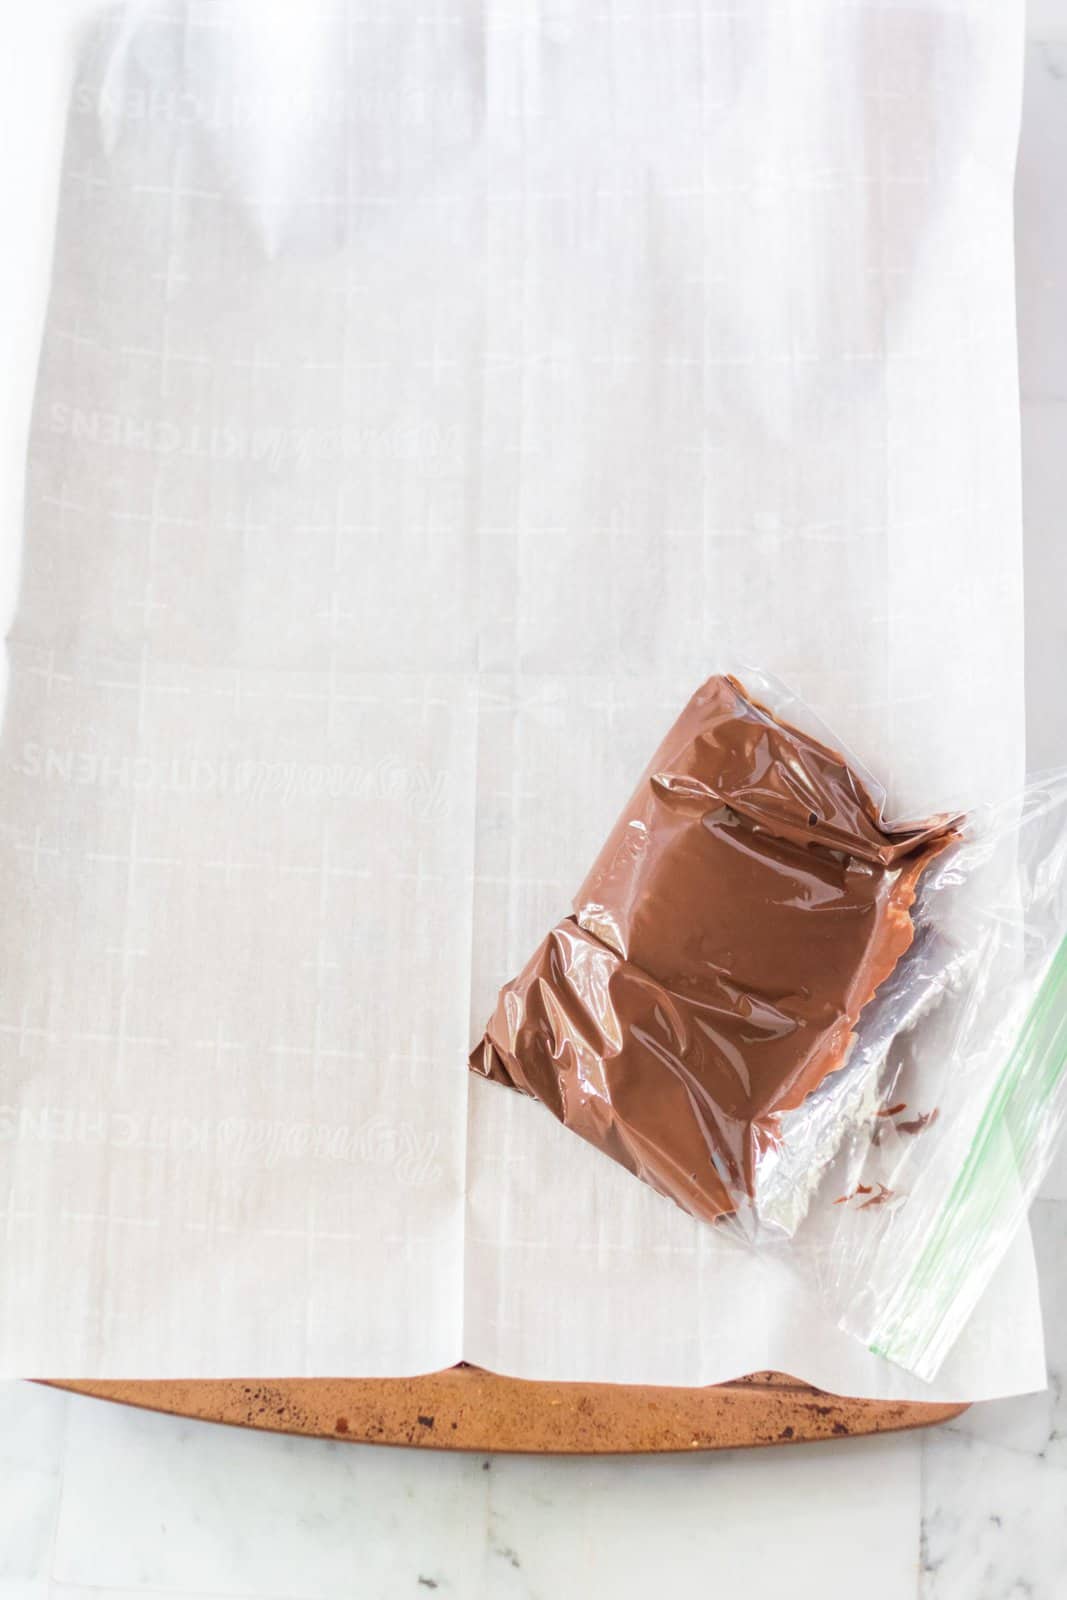 Melted chocolate placed into ziptop bag.